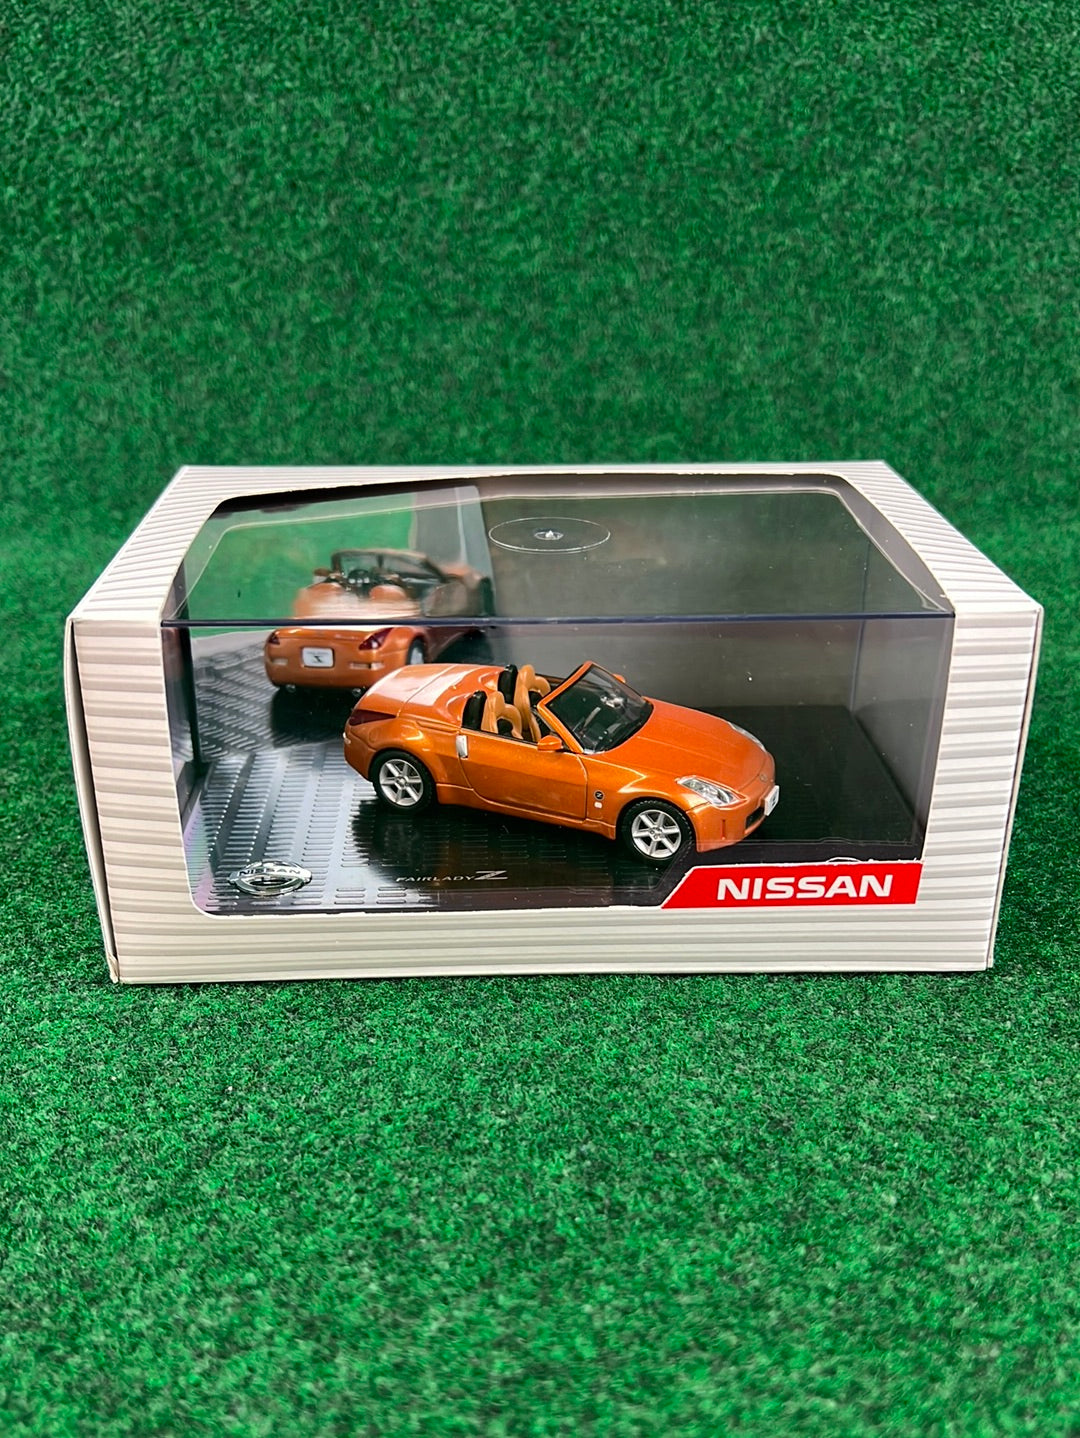 NISSAN Official - KYOSHO Produced: Nissan Z33 Fairlady Z Convertible - 1/43 Scale Diecast